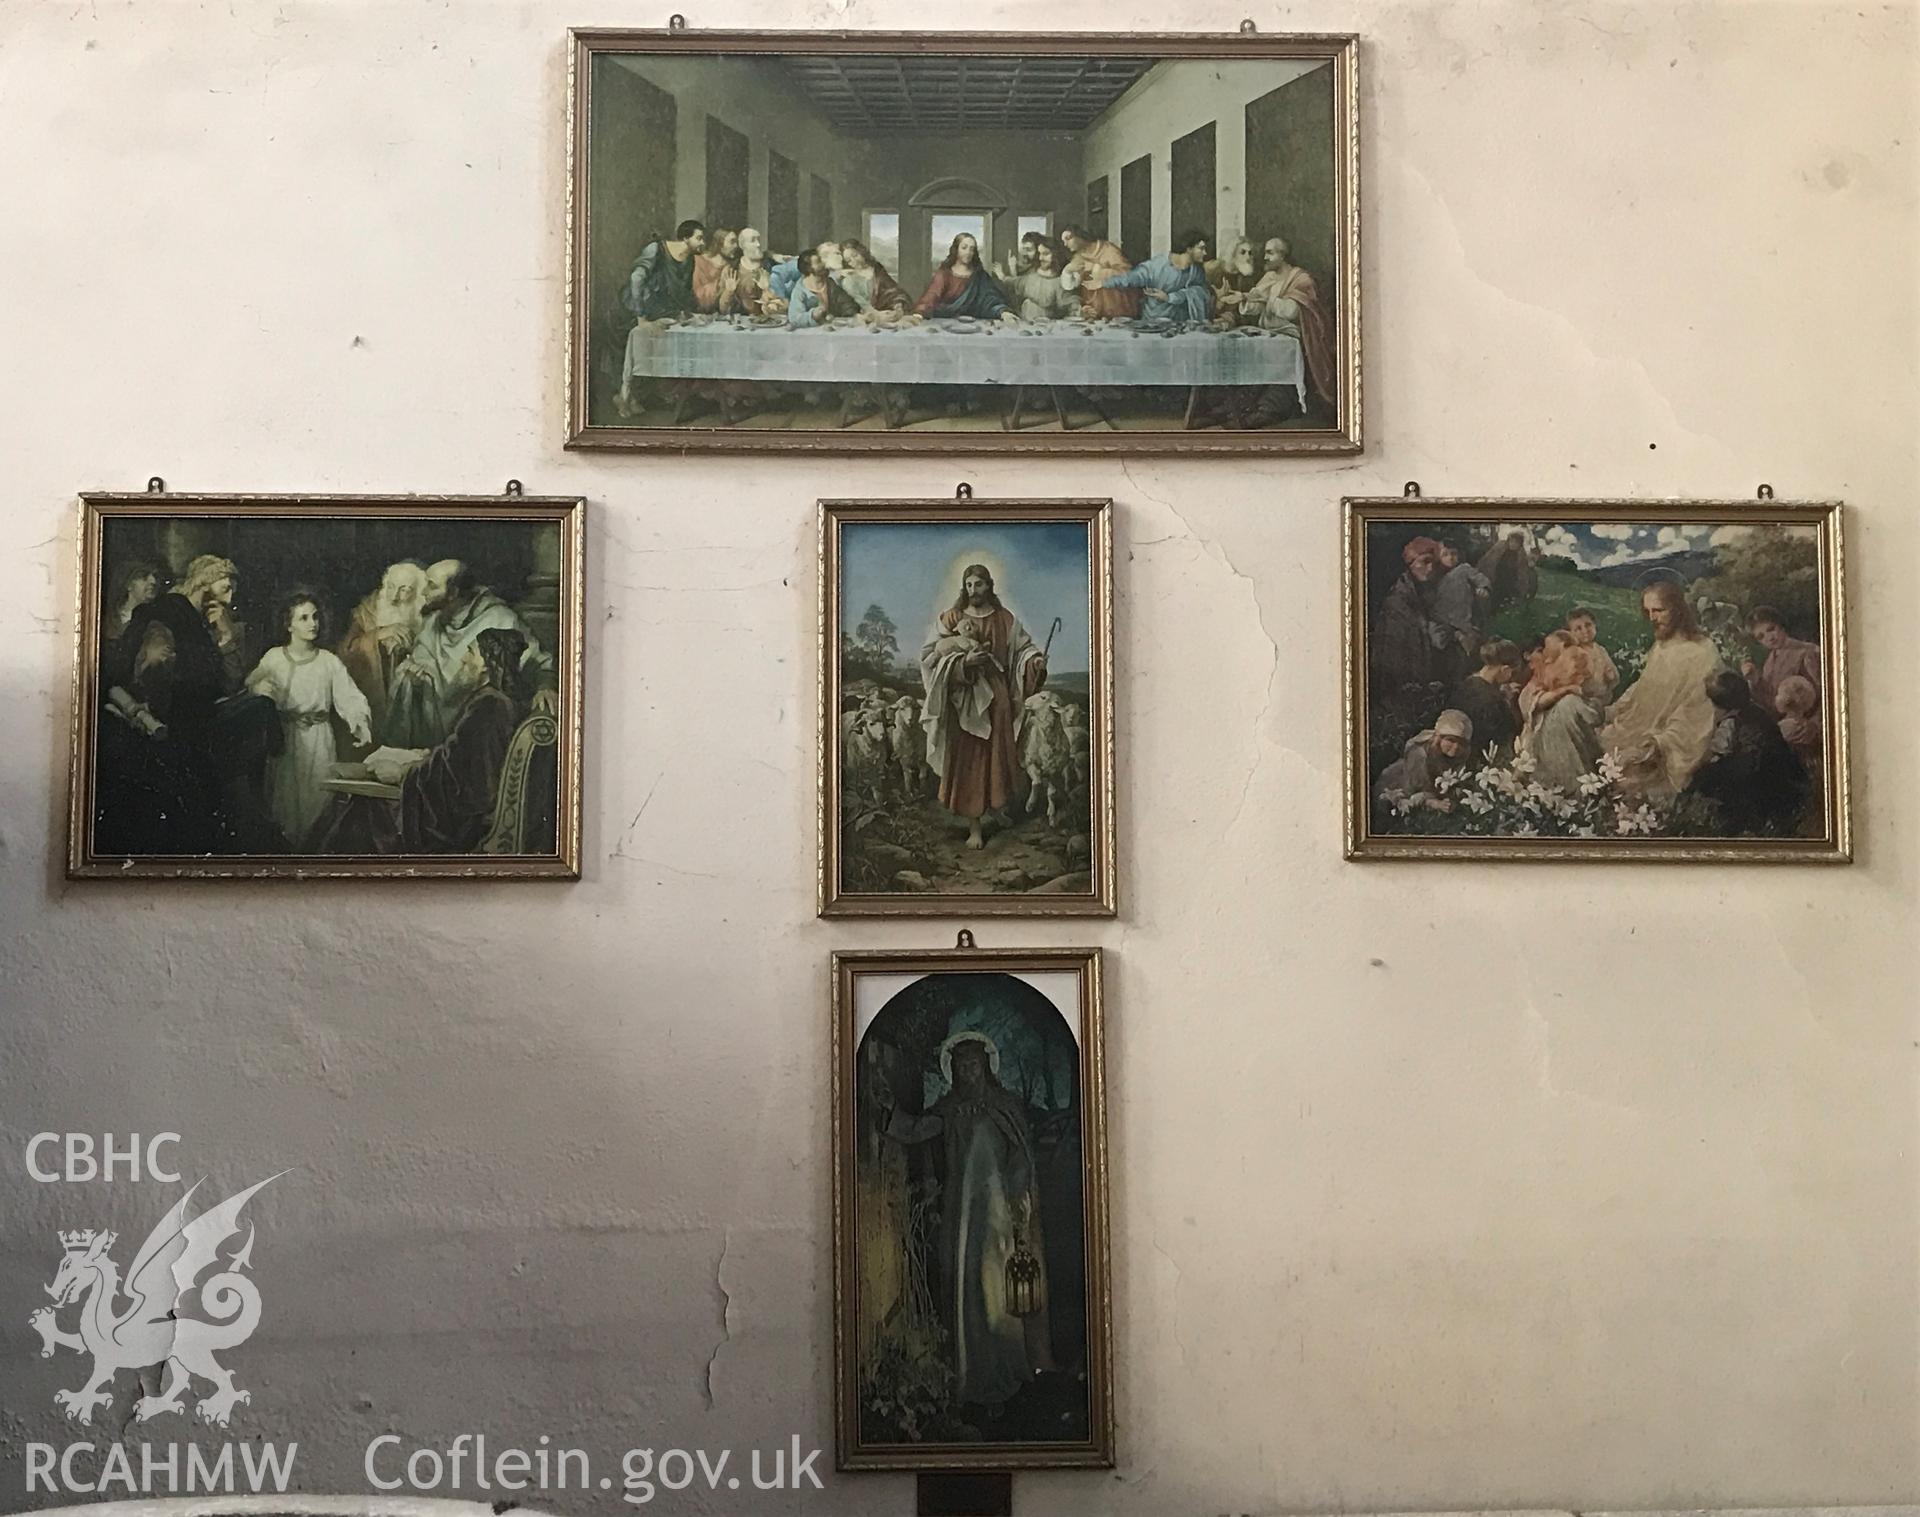 Colour photo showing wall-mounted framed pictures at St Paul's Church, Grangetown, taken by Revd David T. Morris, 2018.